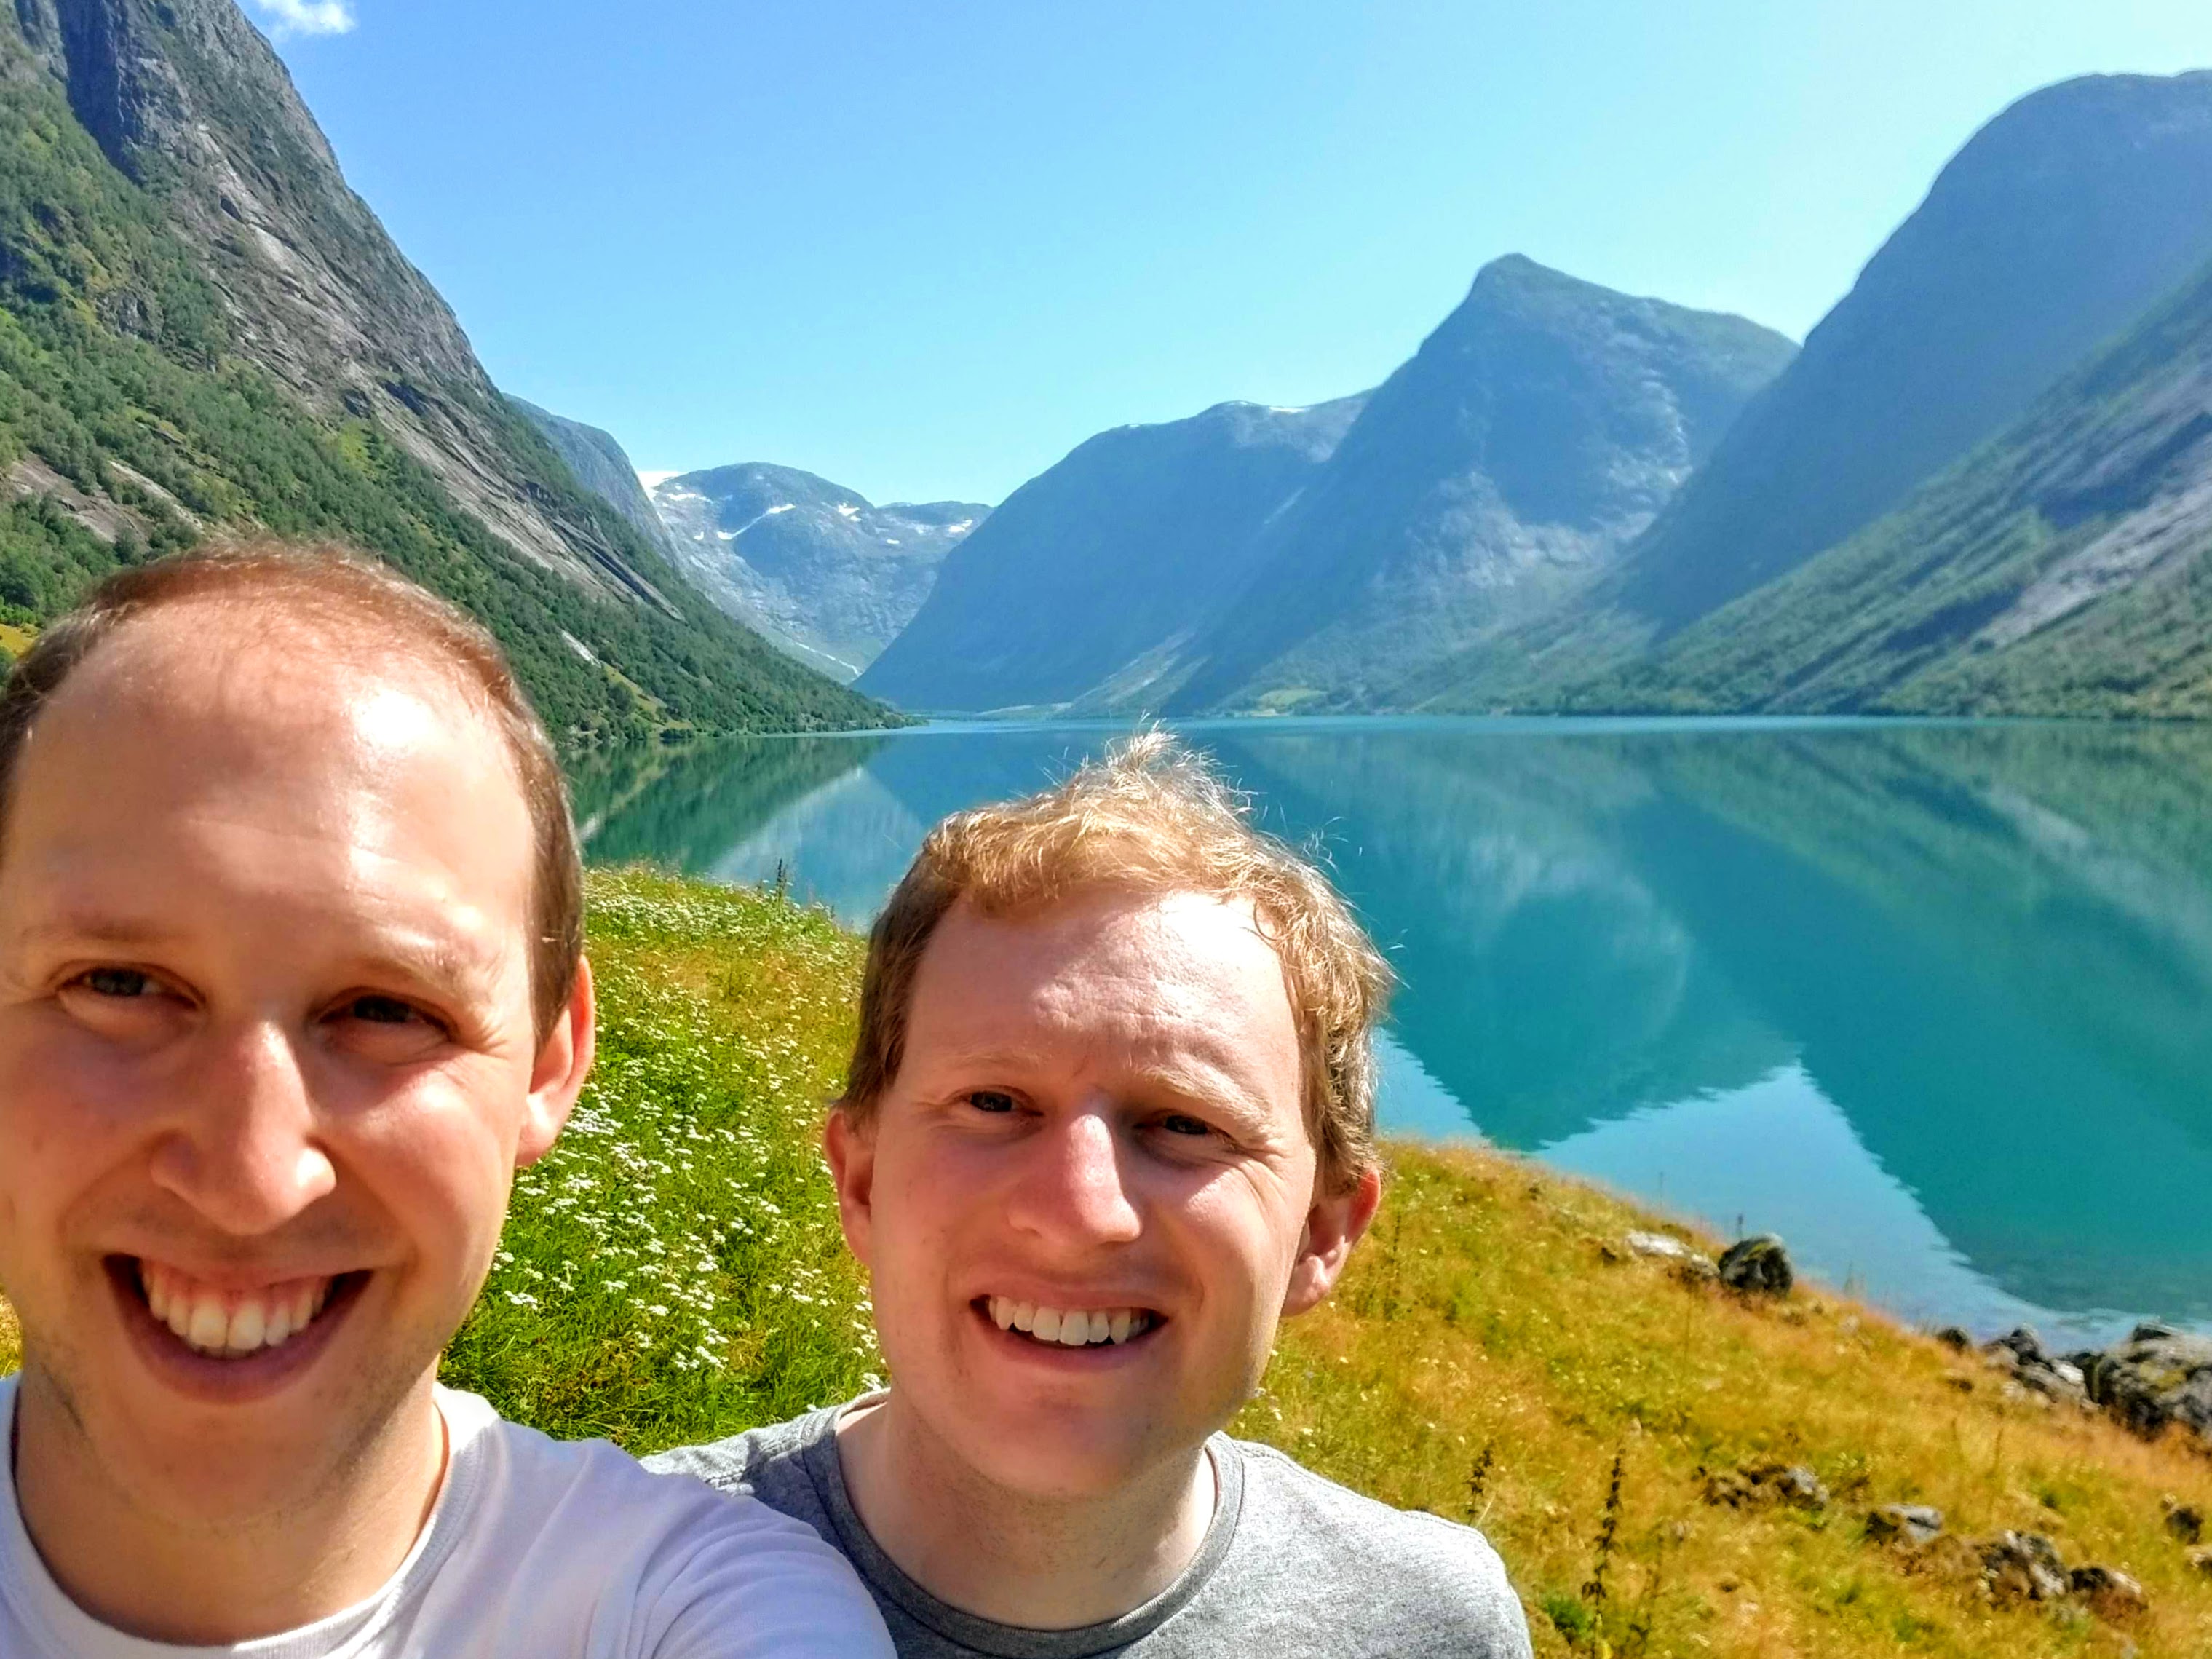 A selfie of two men in front of a blue lake and mountains in Norway.